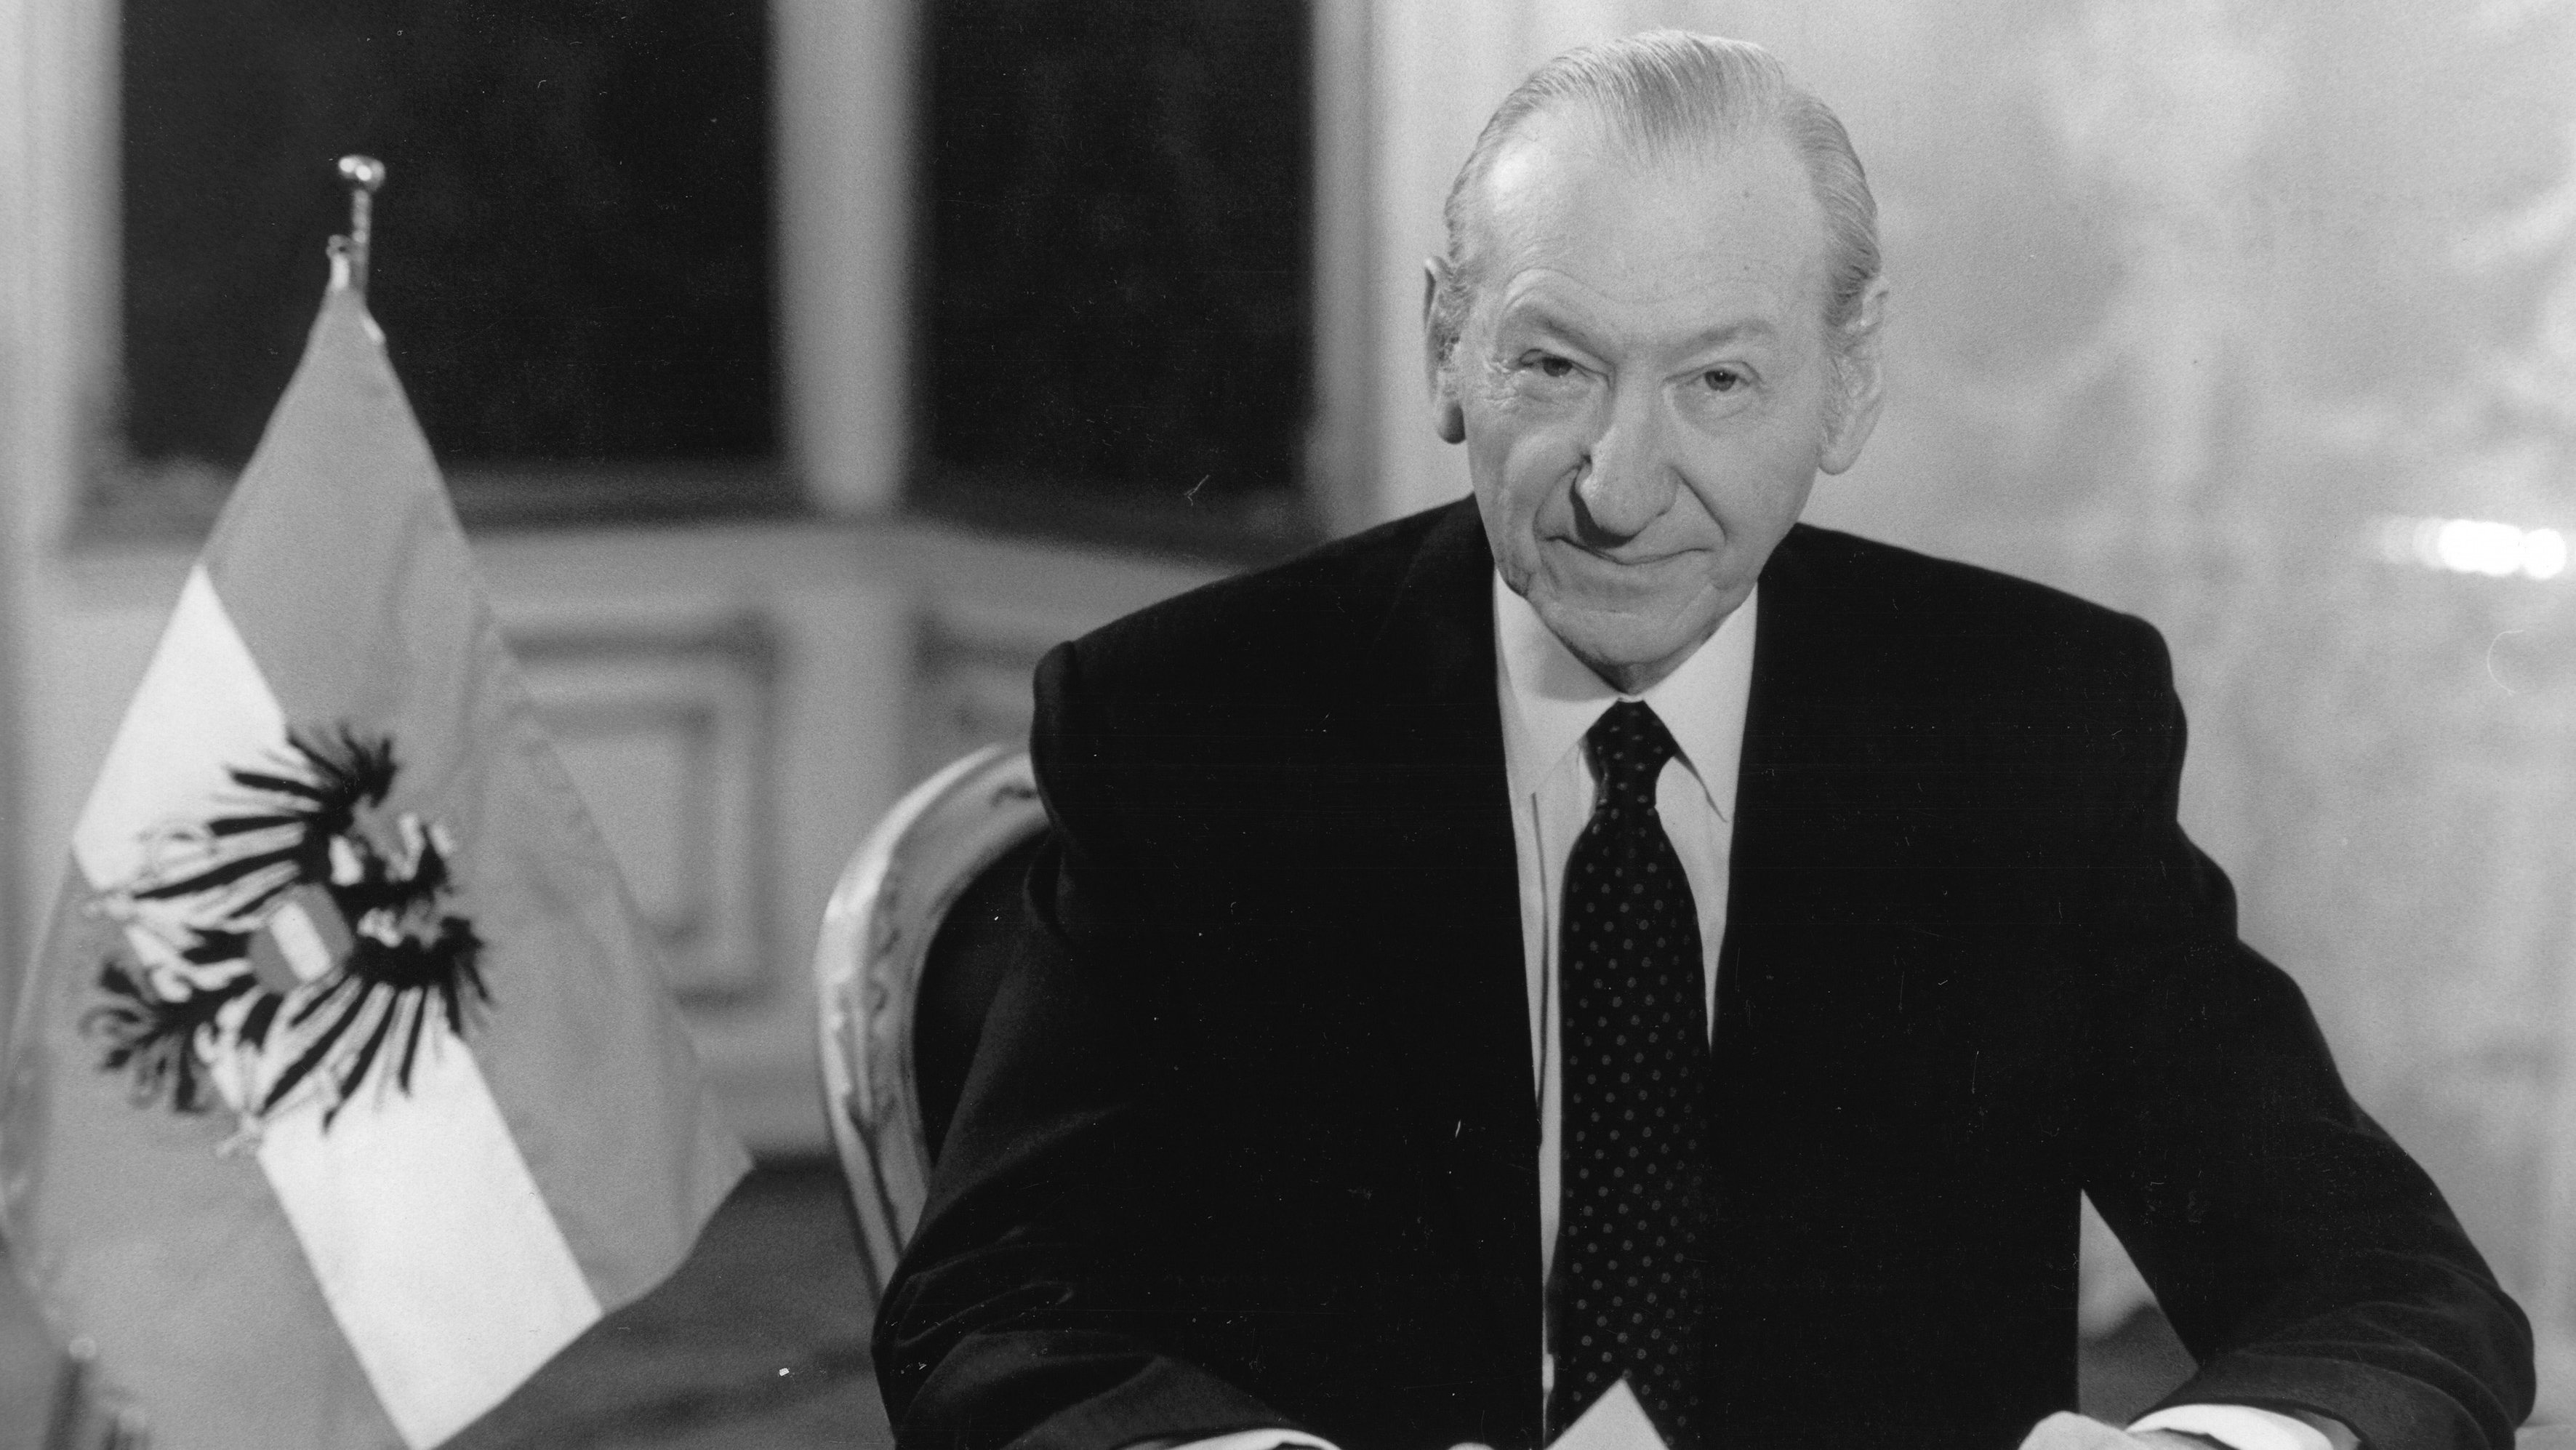 Austrian Federal President Kurt Waldheim Is Pictured At The Recording Of A Television Statement On His Barring From The United States Of America As A Private Citizen. Hofburg. Vienna 1. May 1987. Photograph.